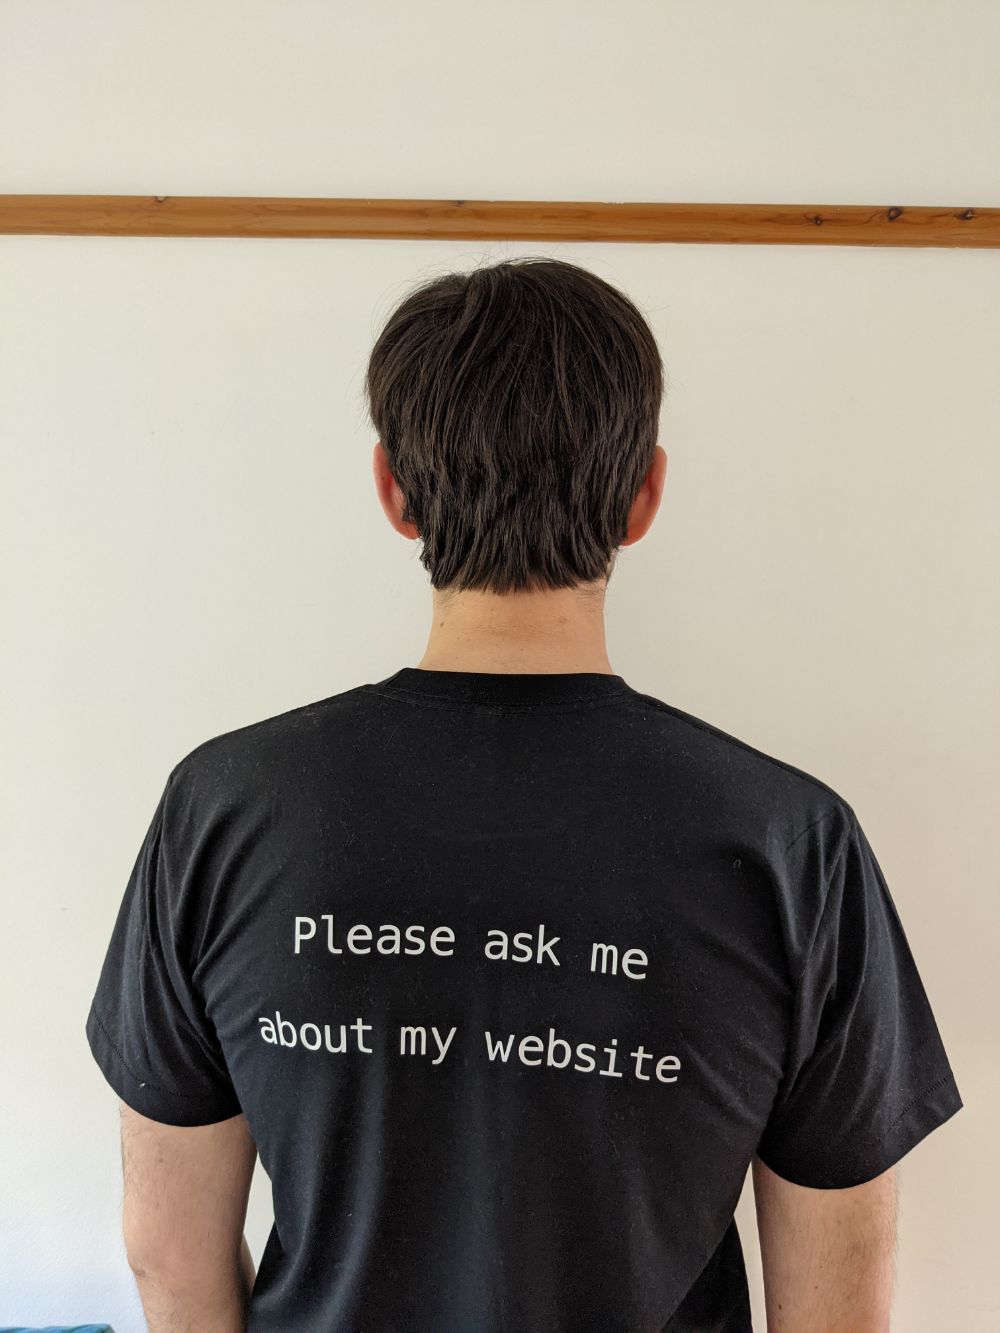 Jamie facing away from the camera with "Please ask me about my website" written on the back of the t-shirt